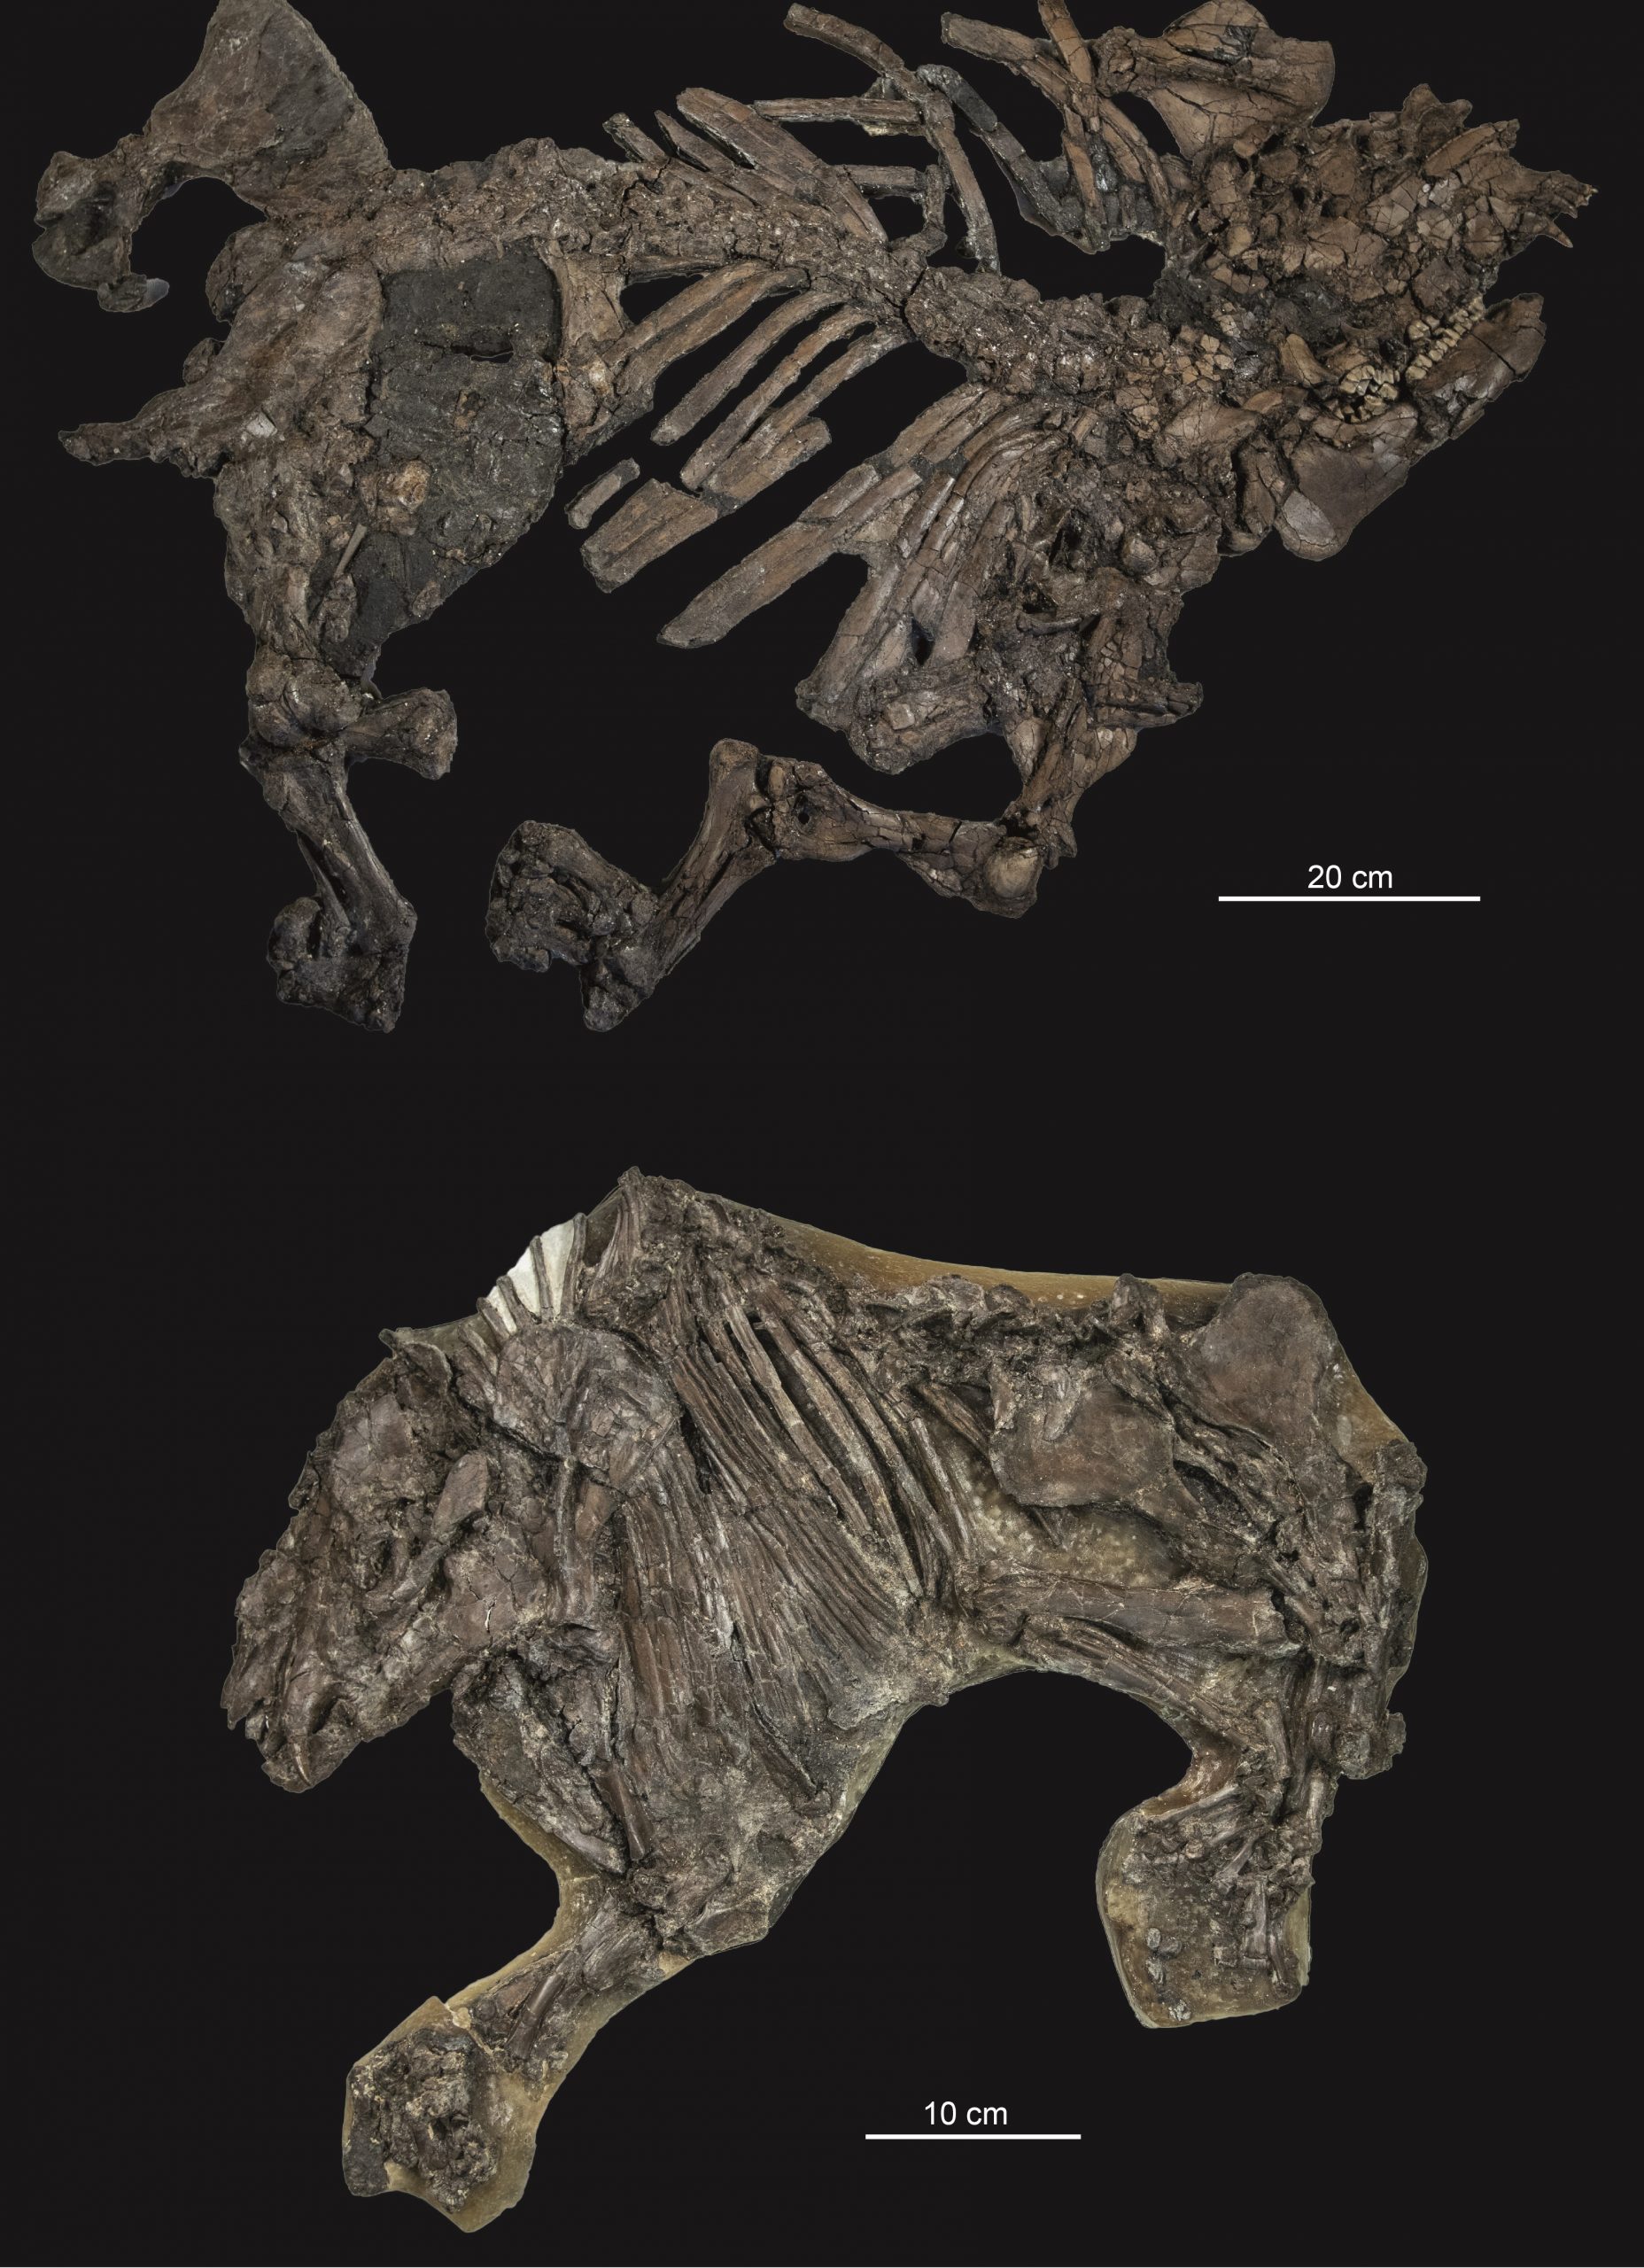 lophiodon_propalaeotherium_dr_oliver_wings.jpg